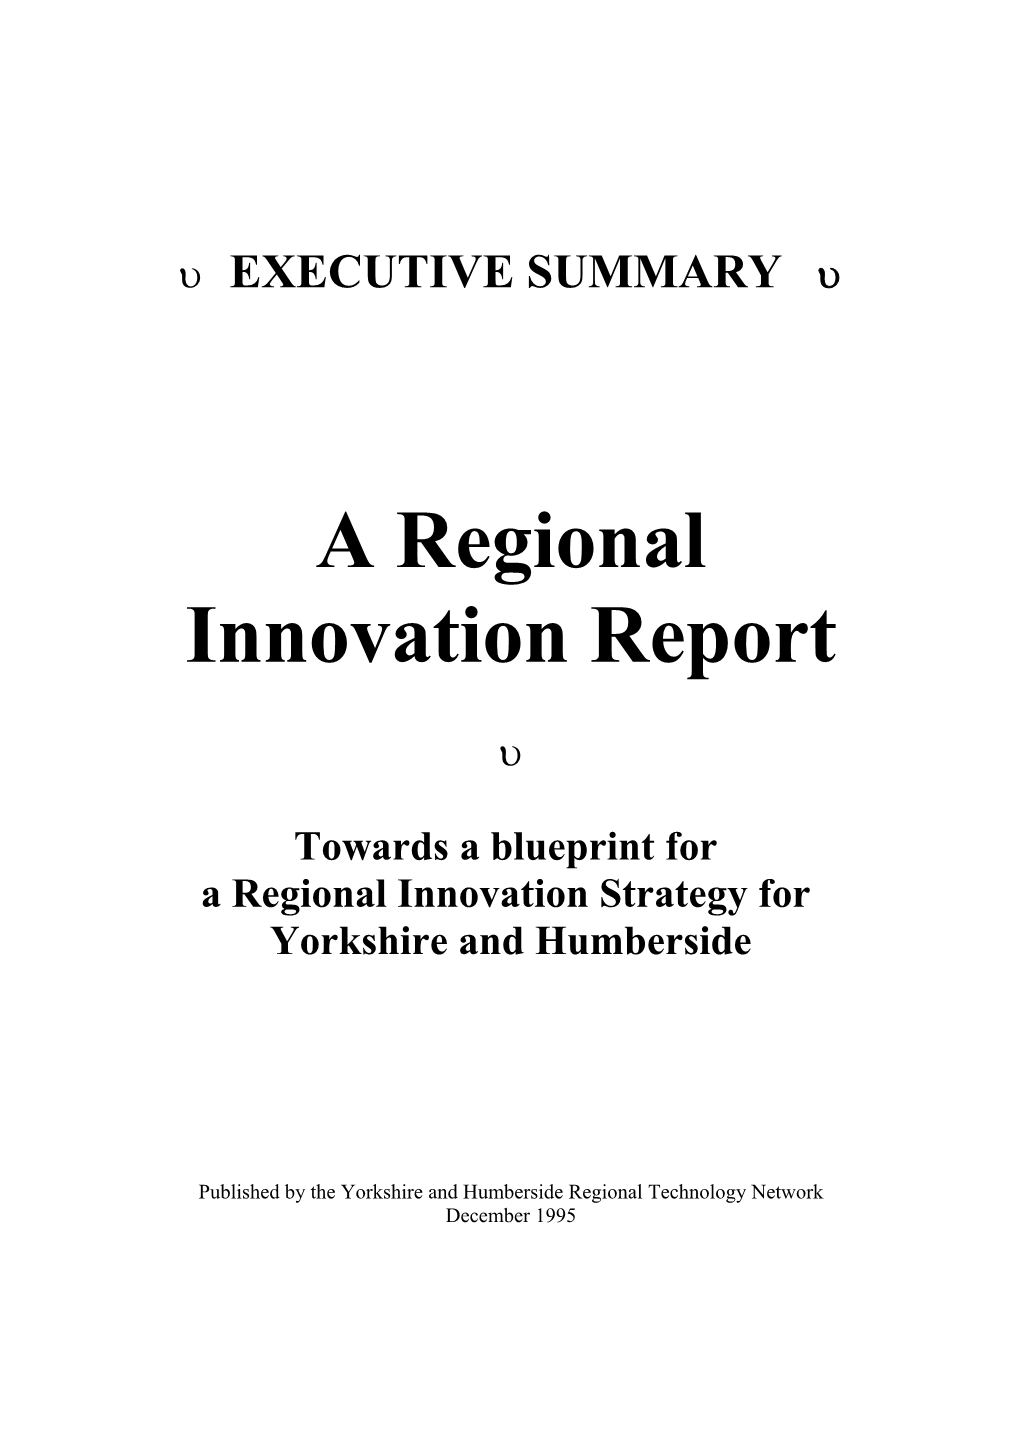 A Regional Innovation Strategy: Towards a Blueprint for Yorkshire and Humberside (Or Regional